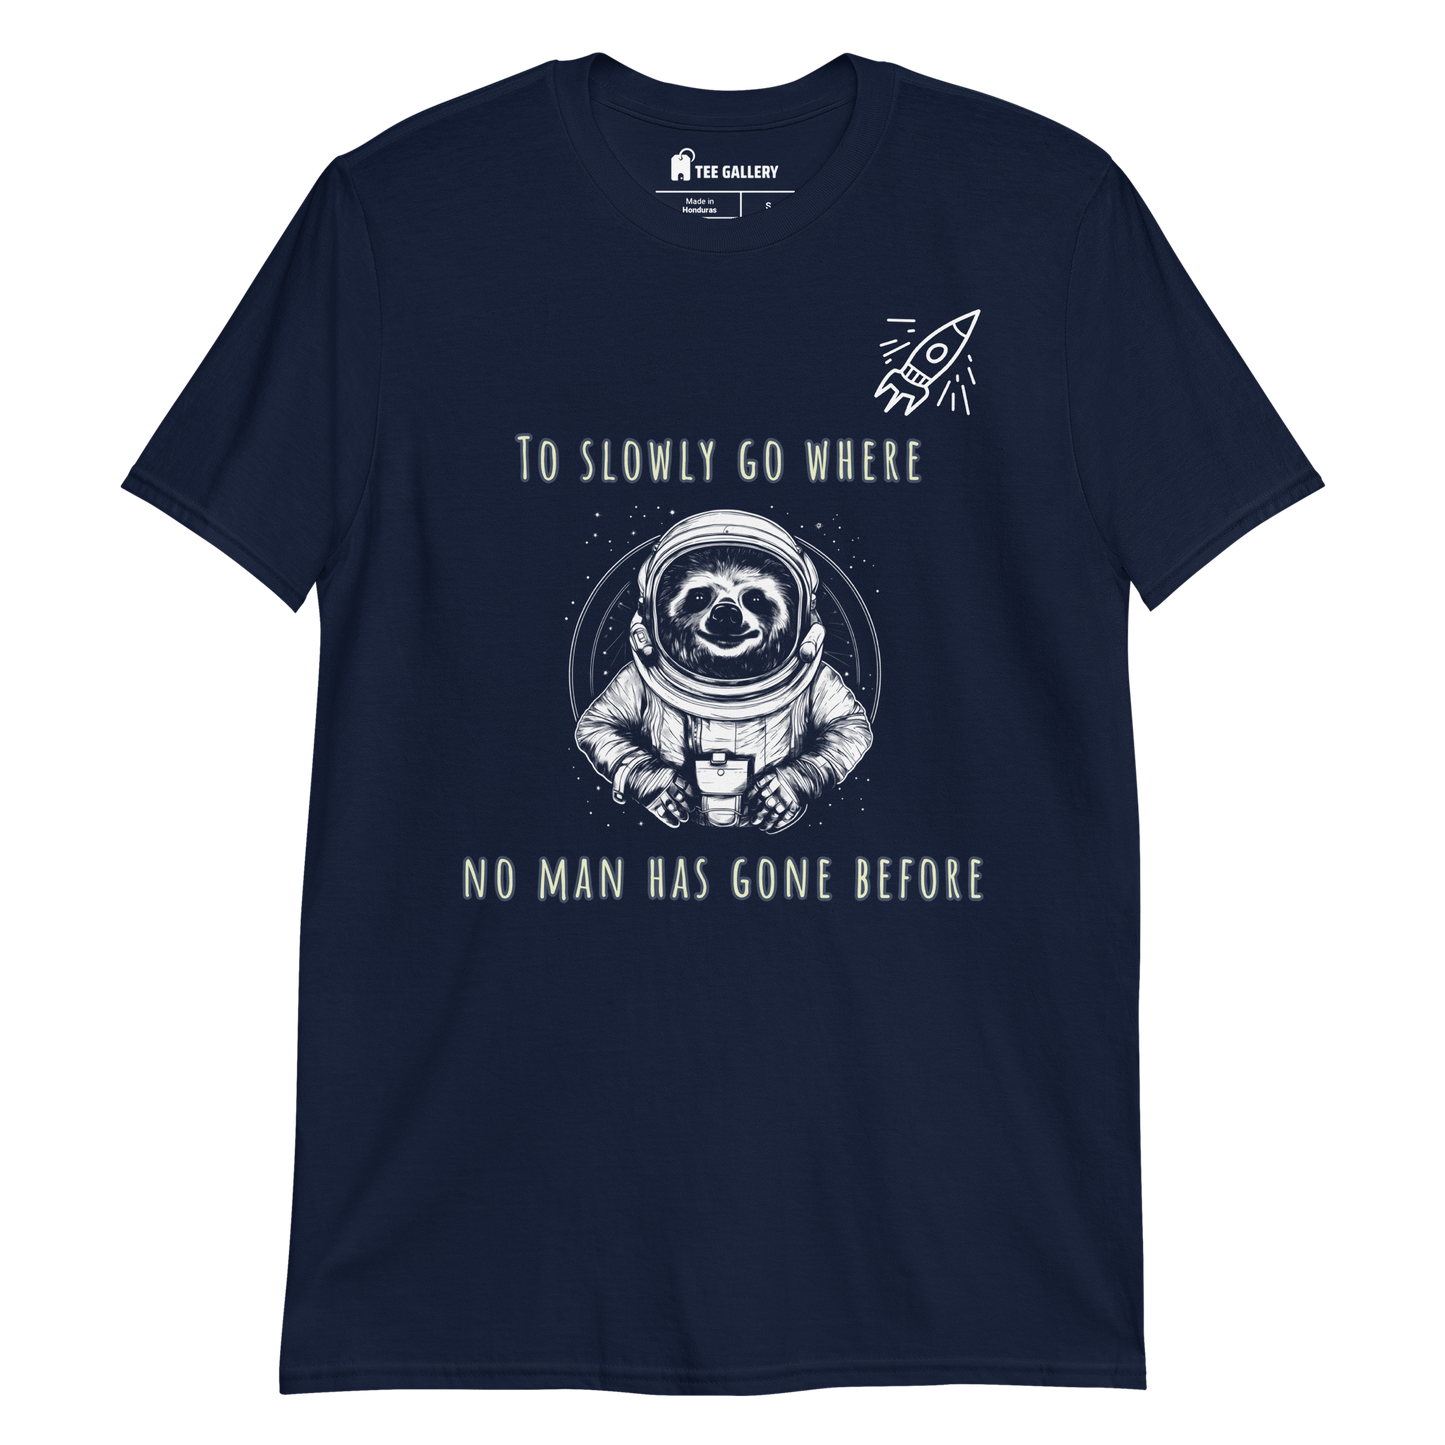 Astronaut Sloth T-Shirt - Funny and Out-of-This-World